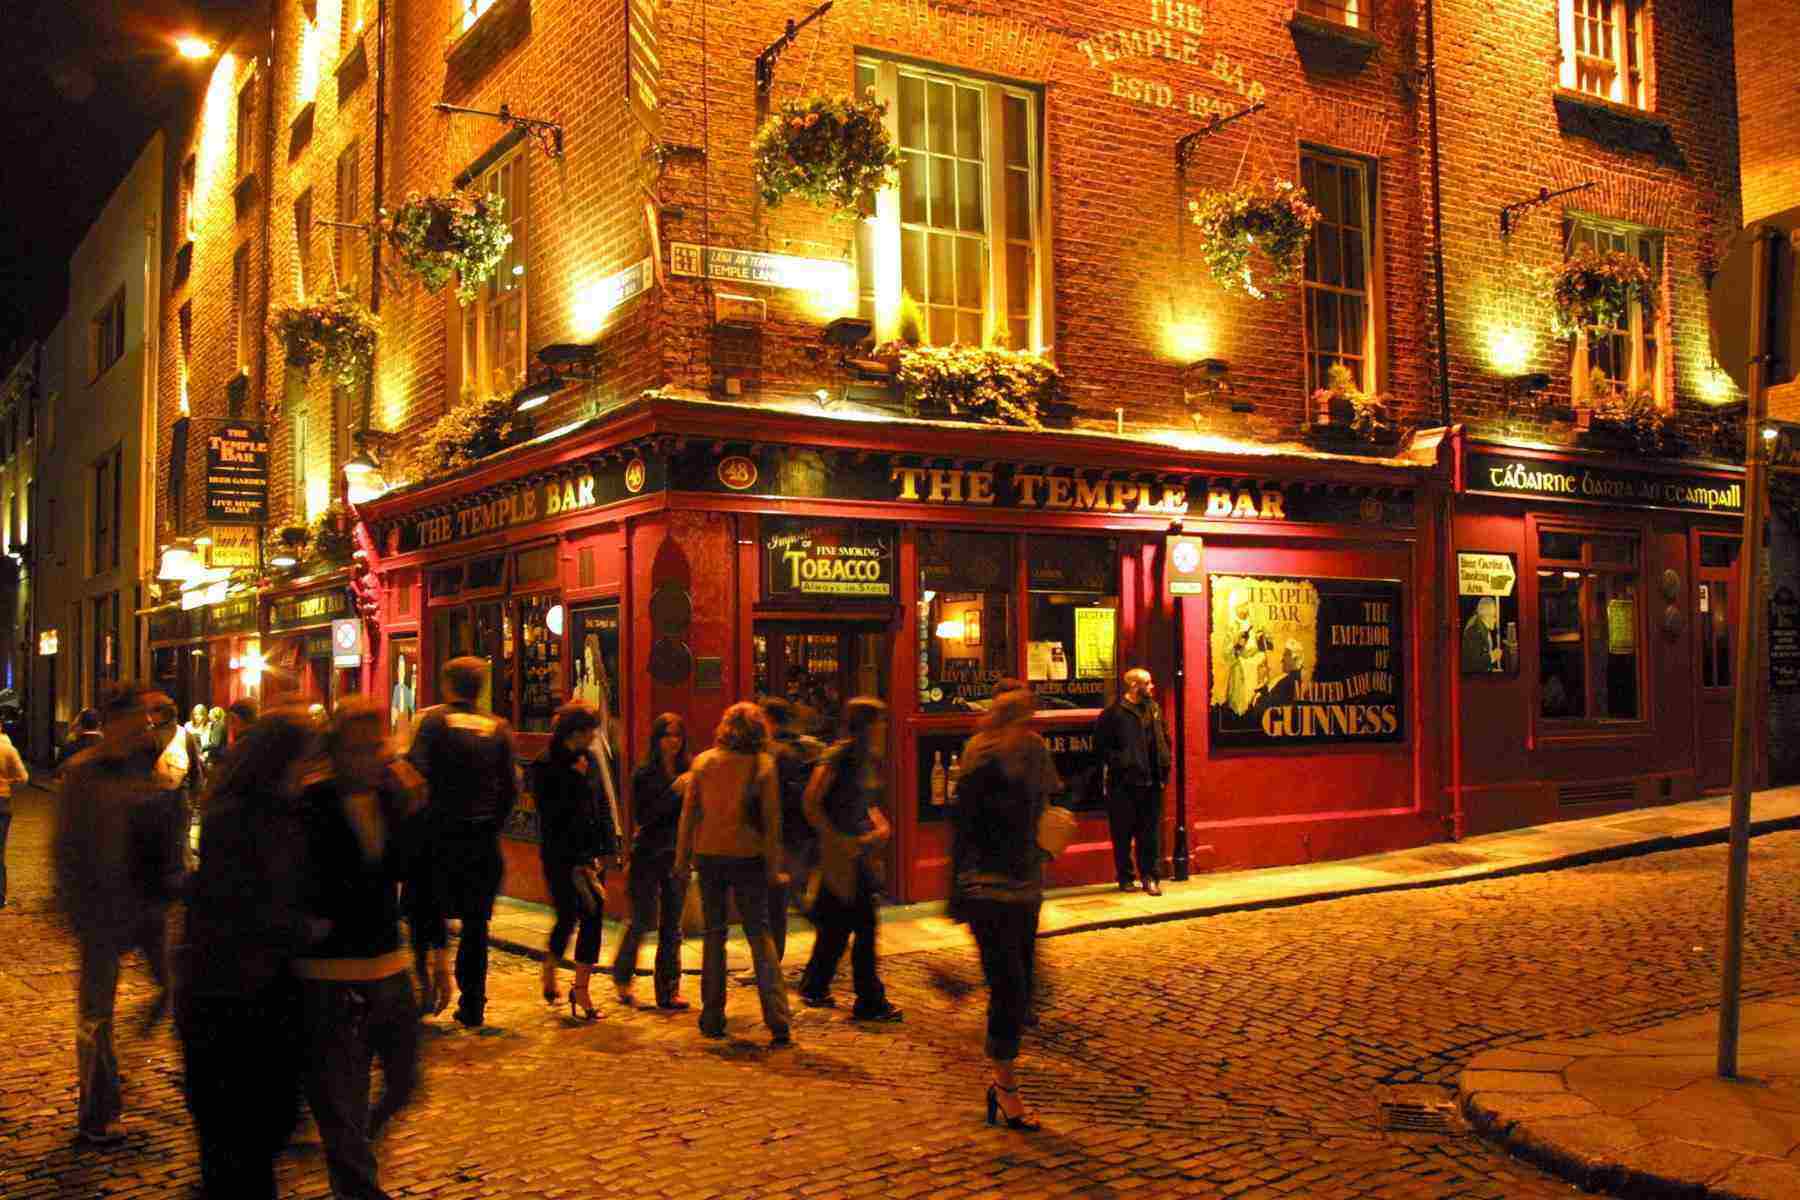 The Temple Inns group traded strongly during the financial year with the benefit of new outlets for the retail business so that total turnover hit €23.1 million last year, up 7% from the previous year's turnover.